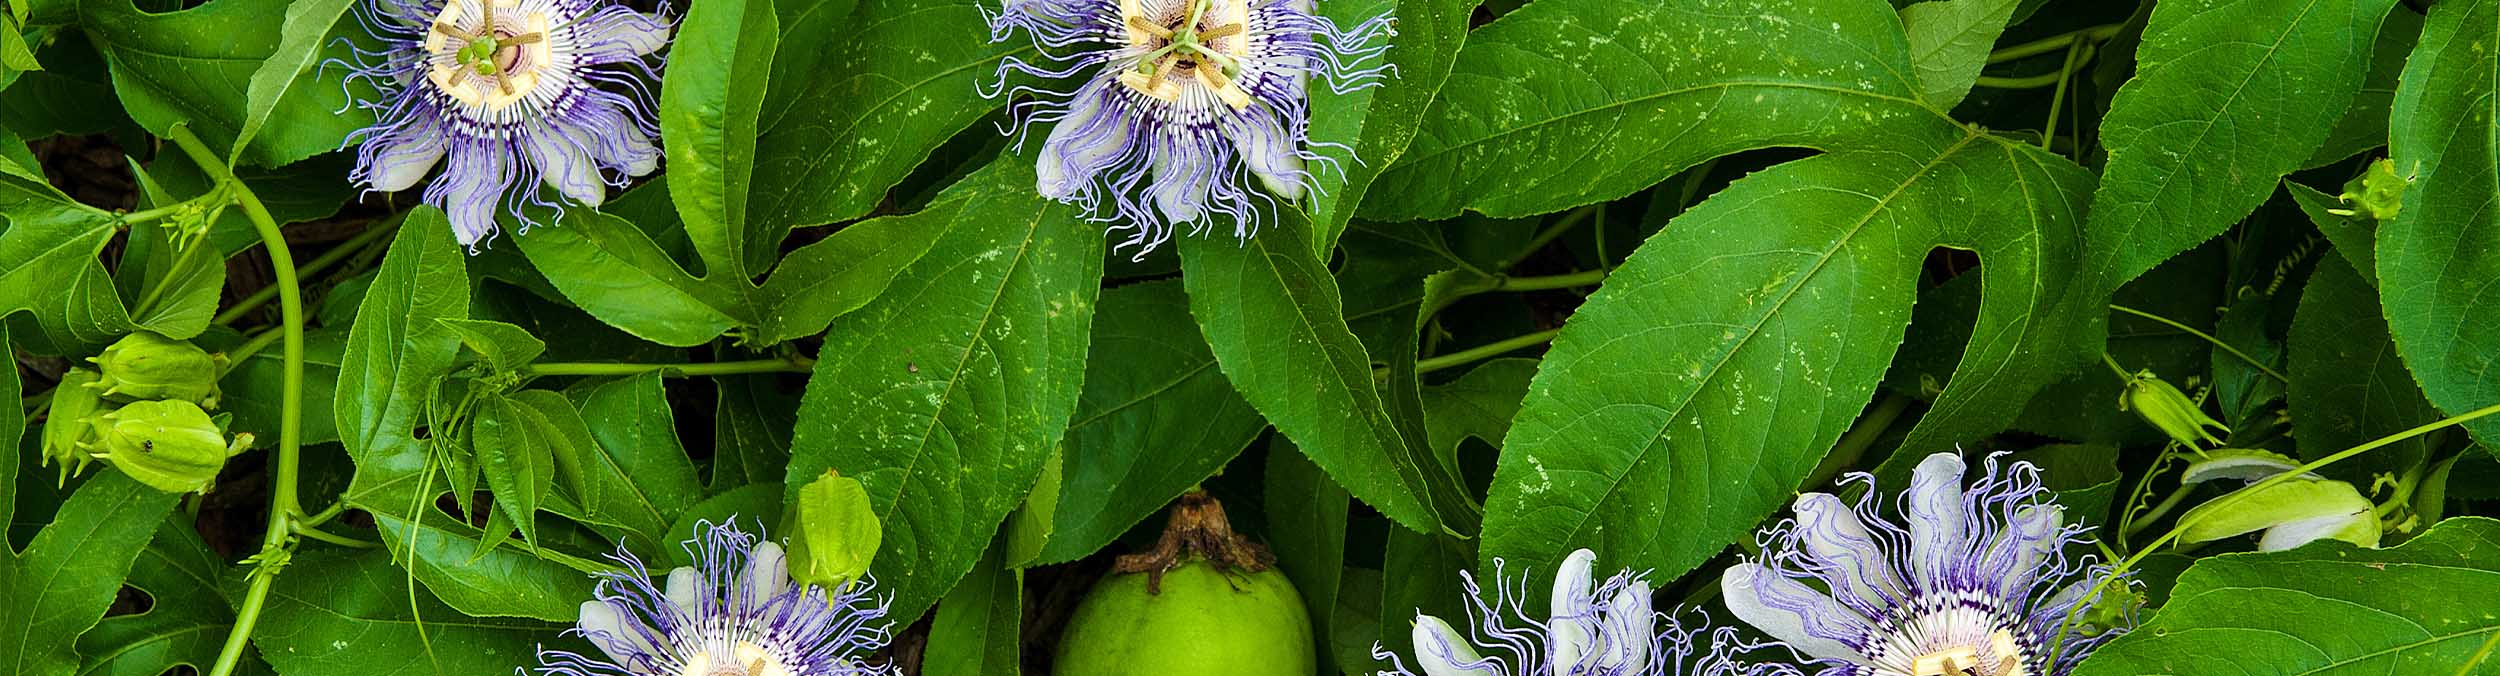 field of passionflowers